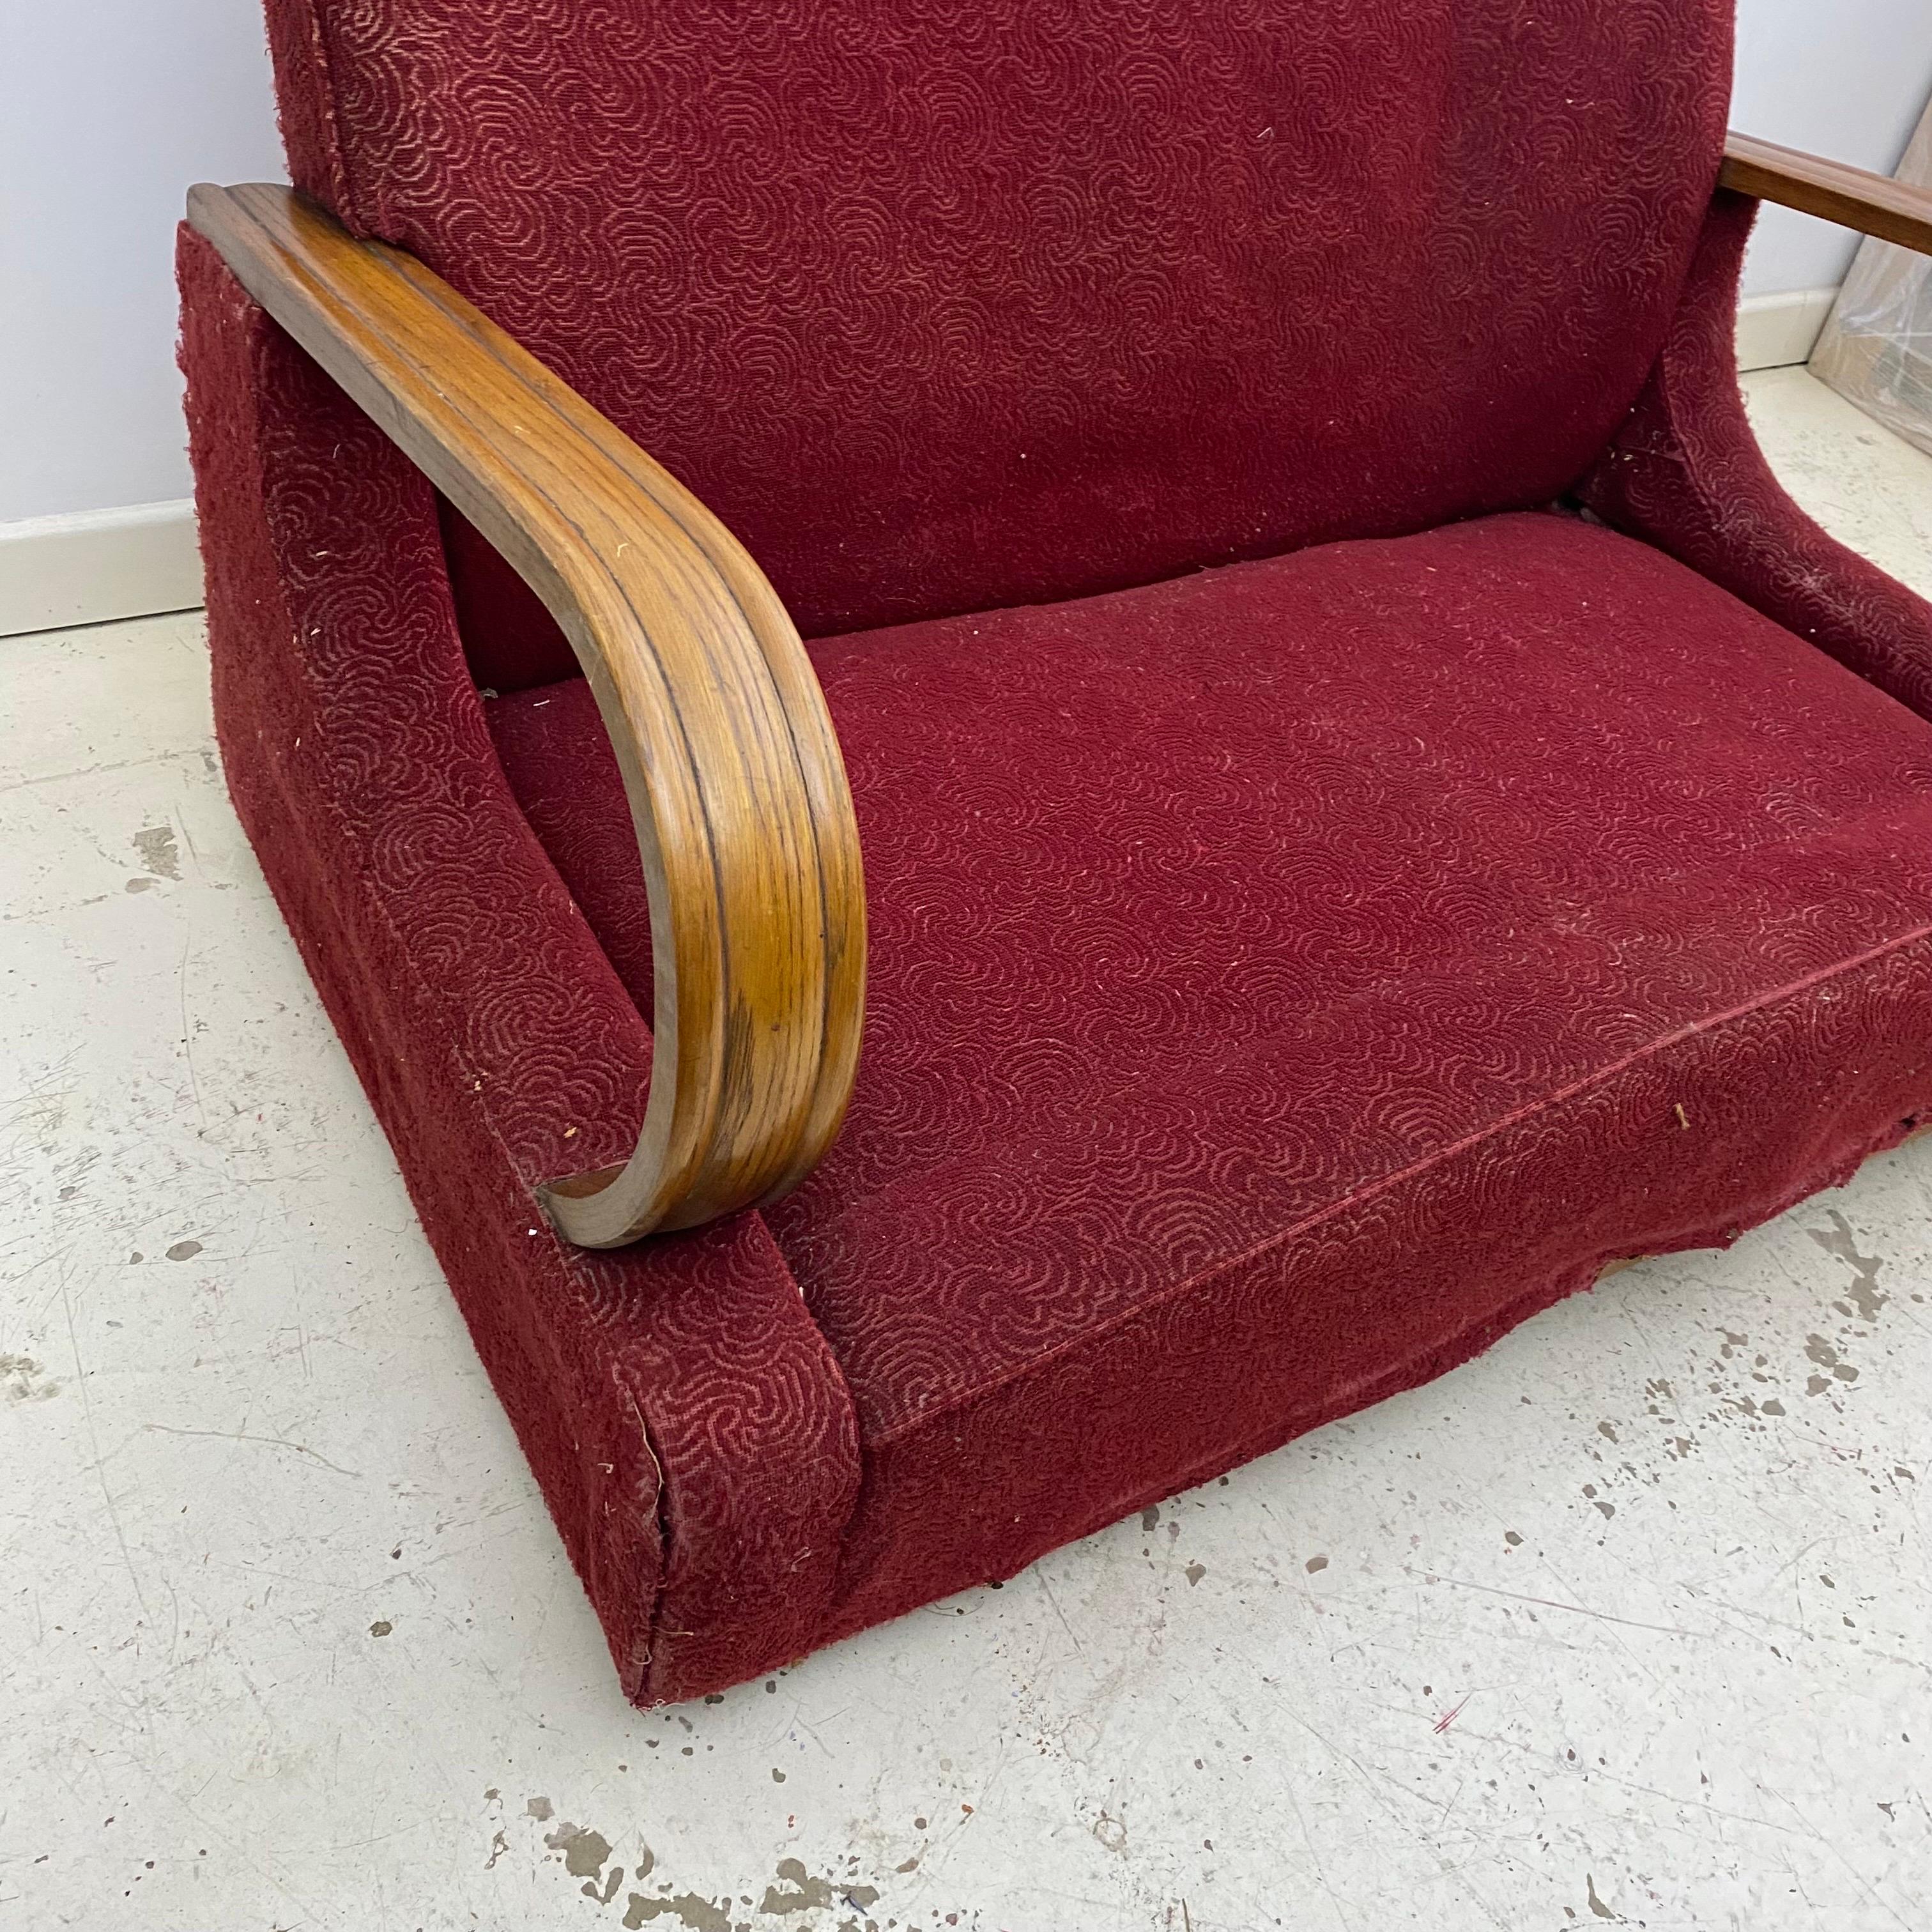 Art Deco 1940s Red Two Seater Distressed Sofa Restoration Project As Seen Poirot en vente 2